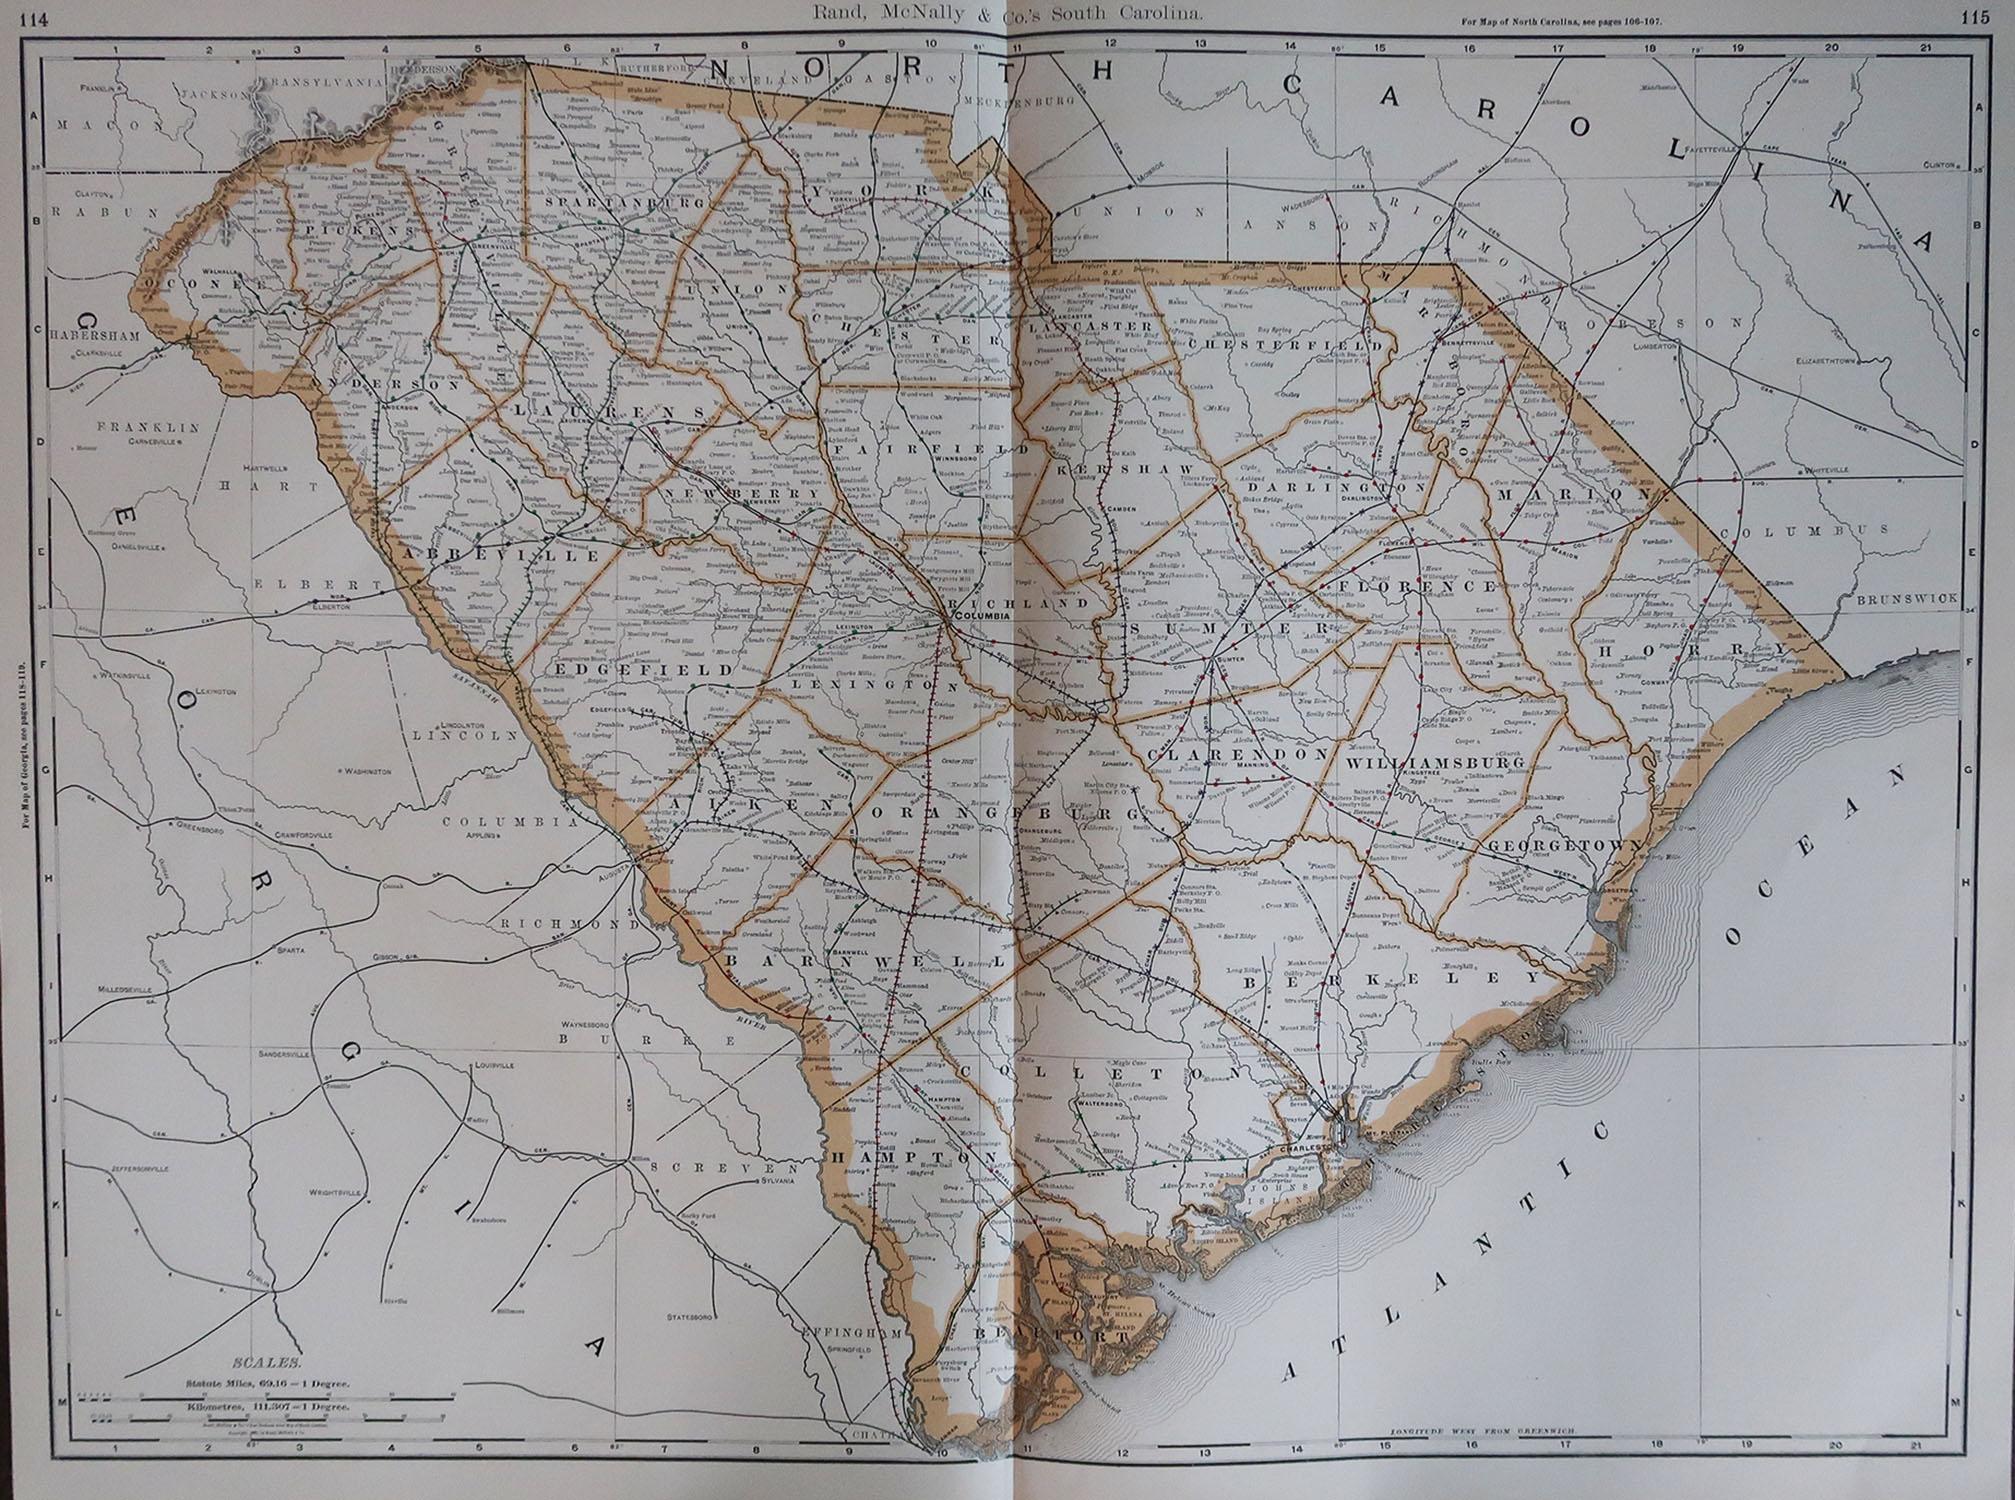 Fabulous map of South Carolina

Original color

By Rand, McNally & Co.

Published, 1894

Unframed

Free shipping.